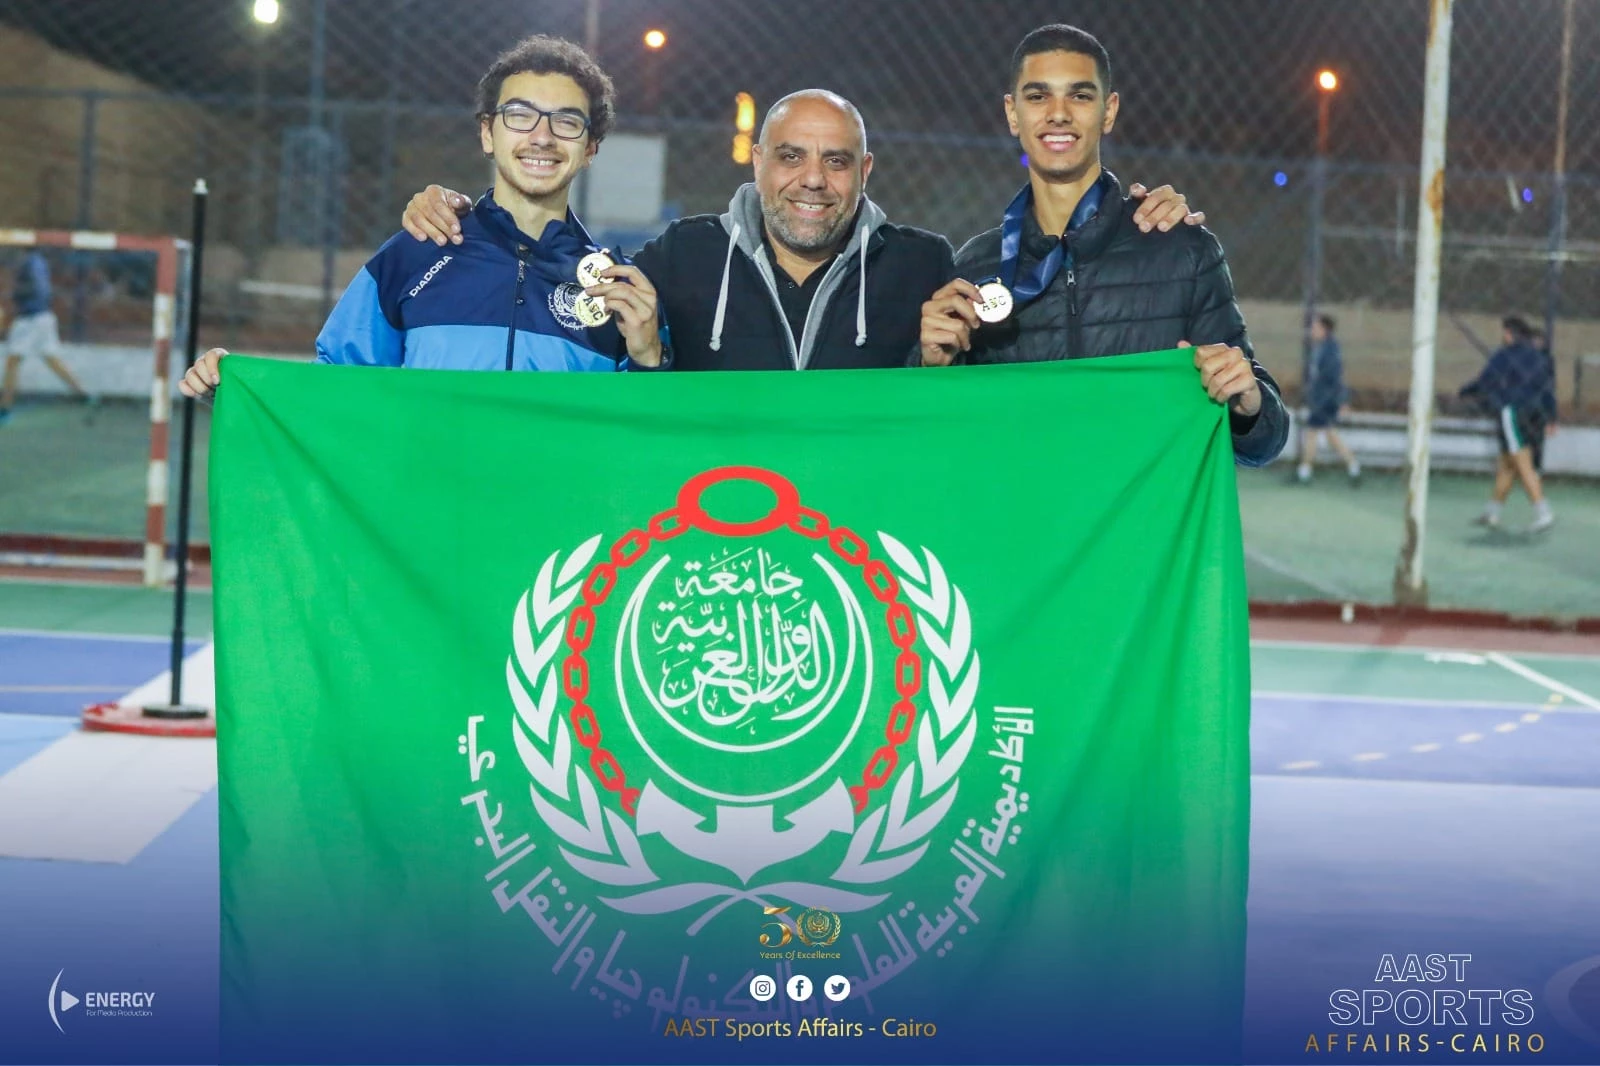 The academy was crowned in Cairo with the first place Cup in the student championship and the first place Cup in the female student championship in the private universities Speedball Championship11